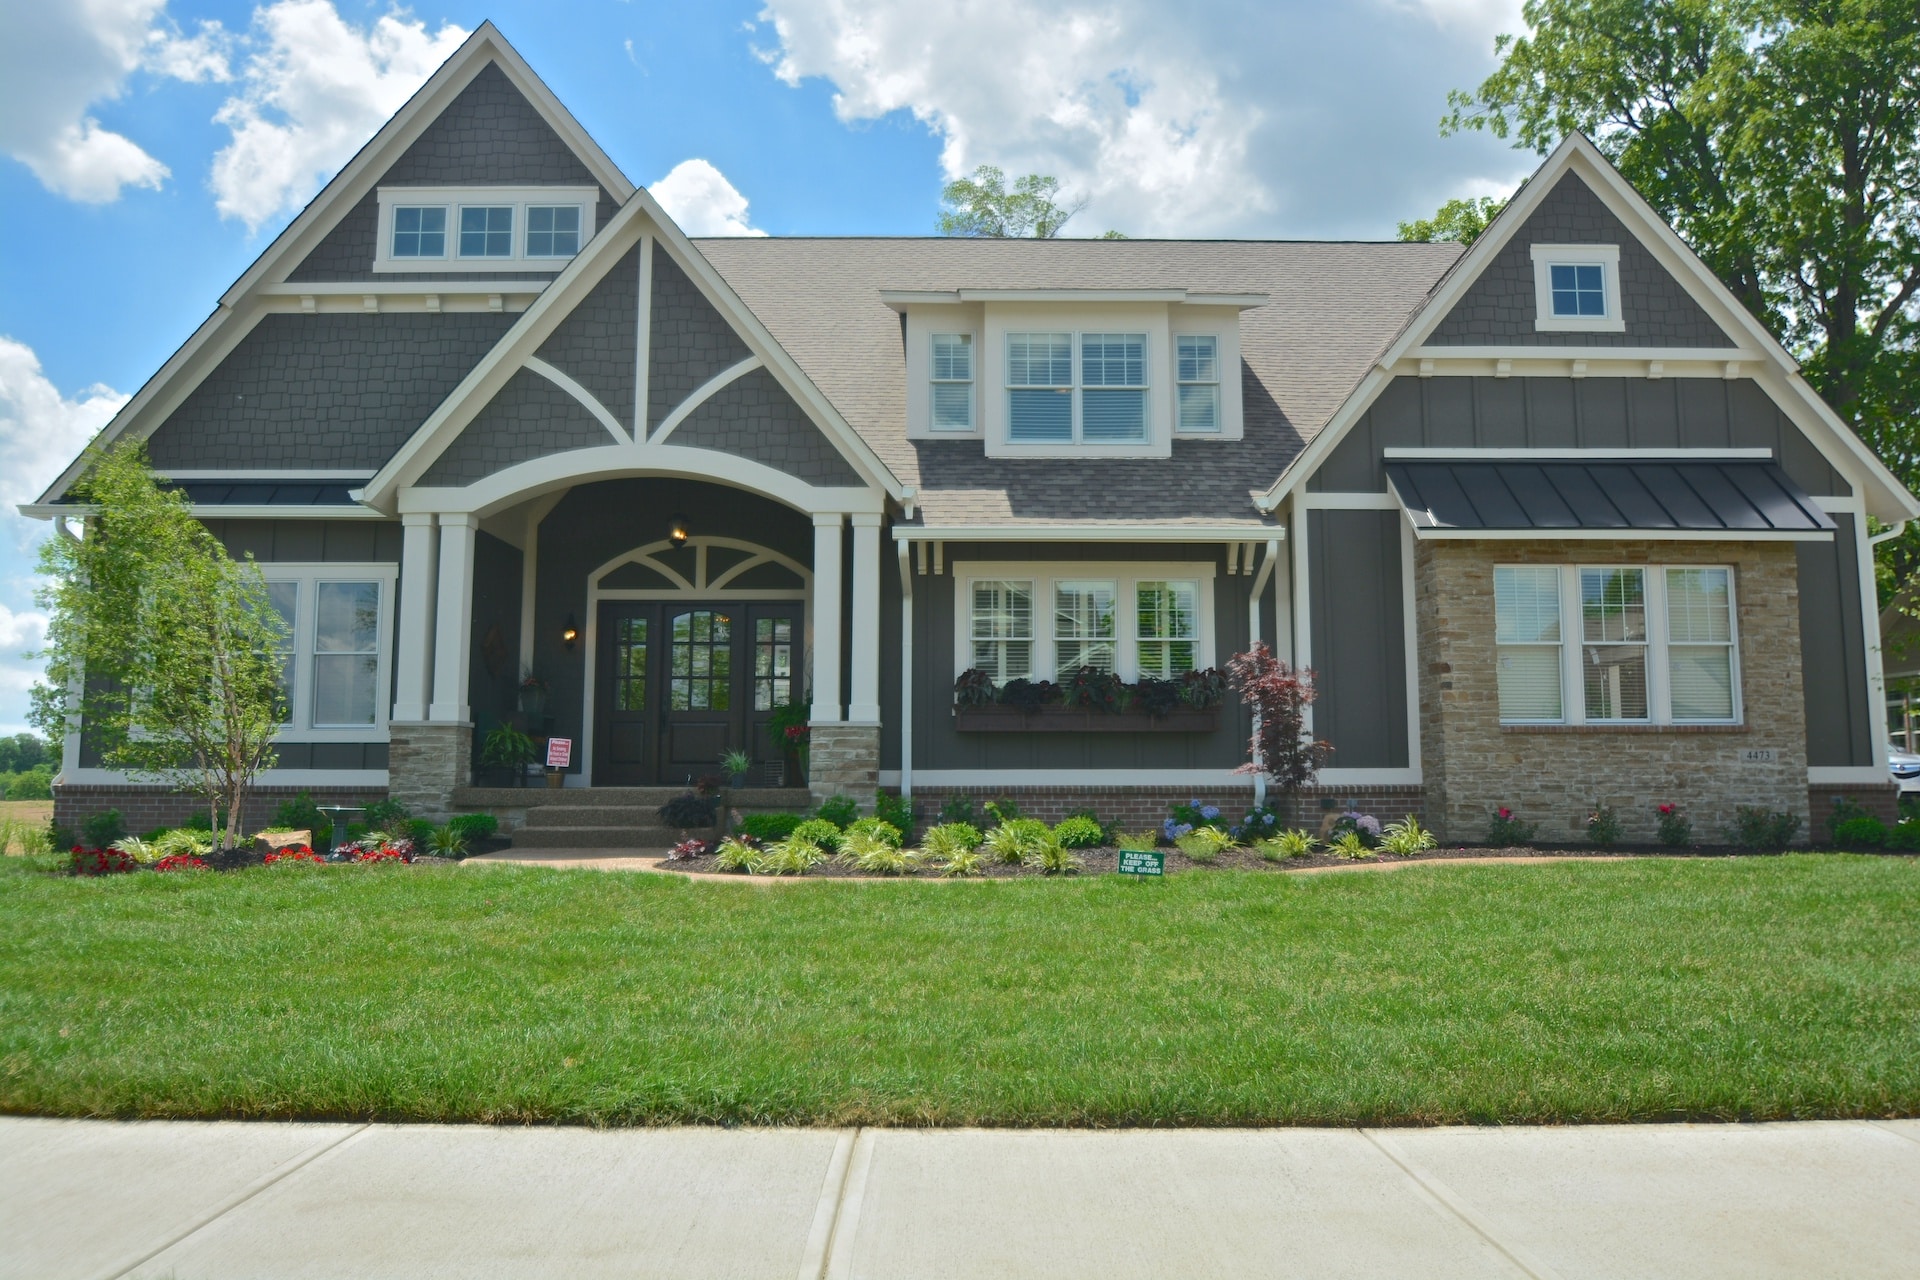 A luxurious home in Fishers, Indiana with a large front yard and a spacious front porch.